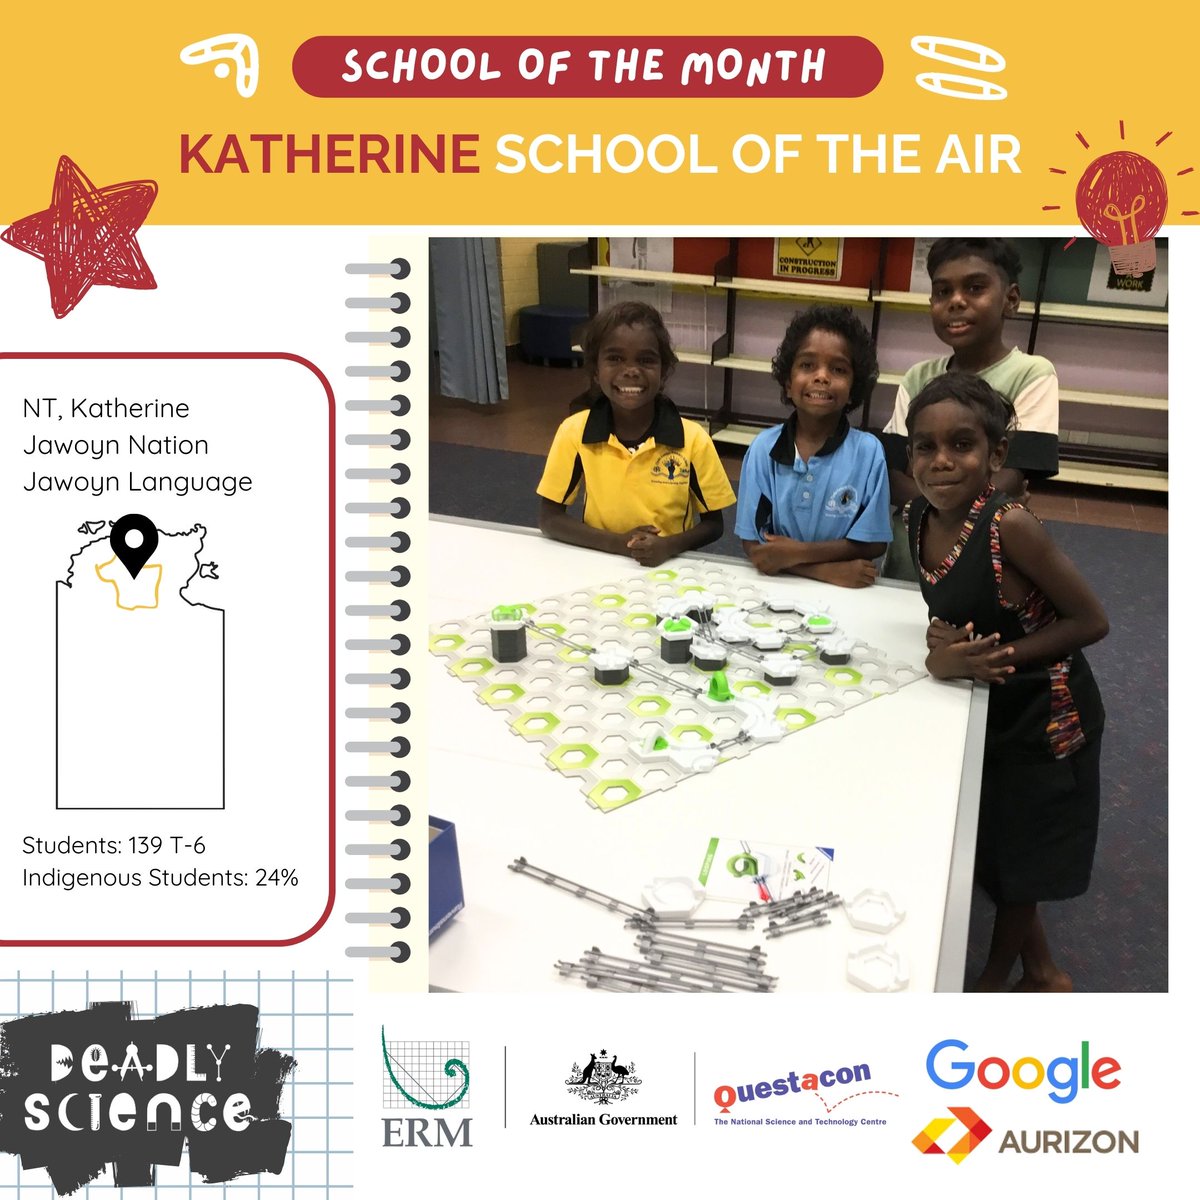 Celebrating our latest School of the Month - Katherine School of the Air! Here are some of their deadly learners discovering physics using the GraviTrax Marble Run. Do you want to be the next School of the Month? Email: admin@deadlyscience.org.au